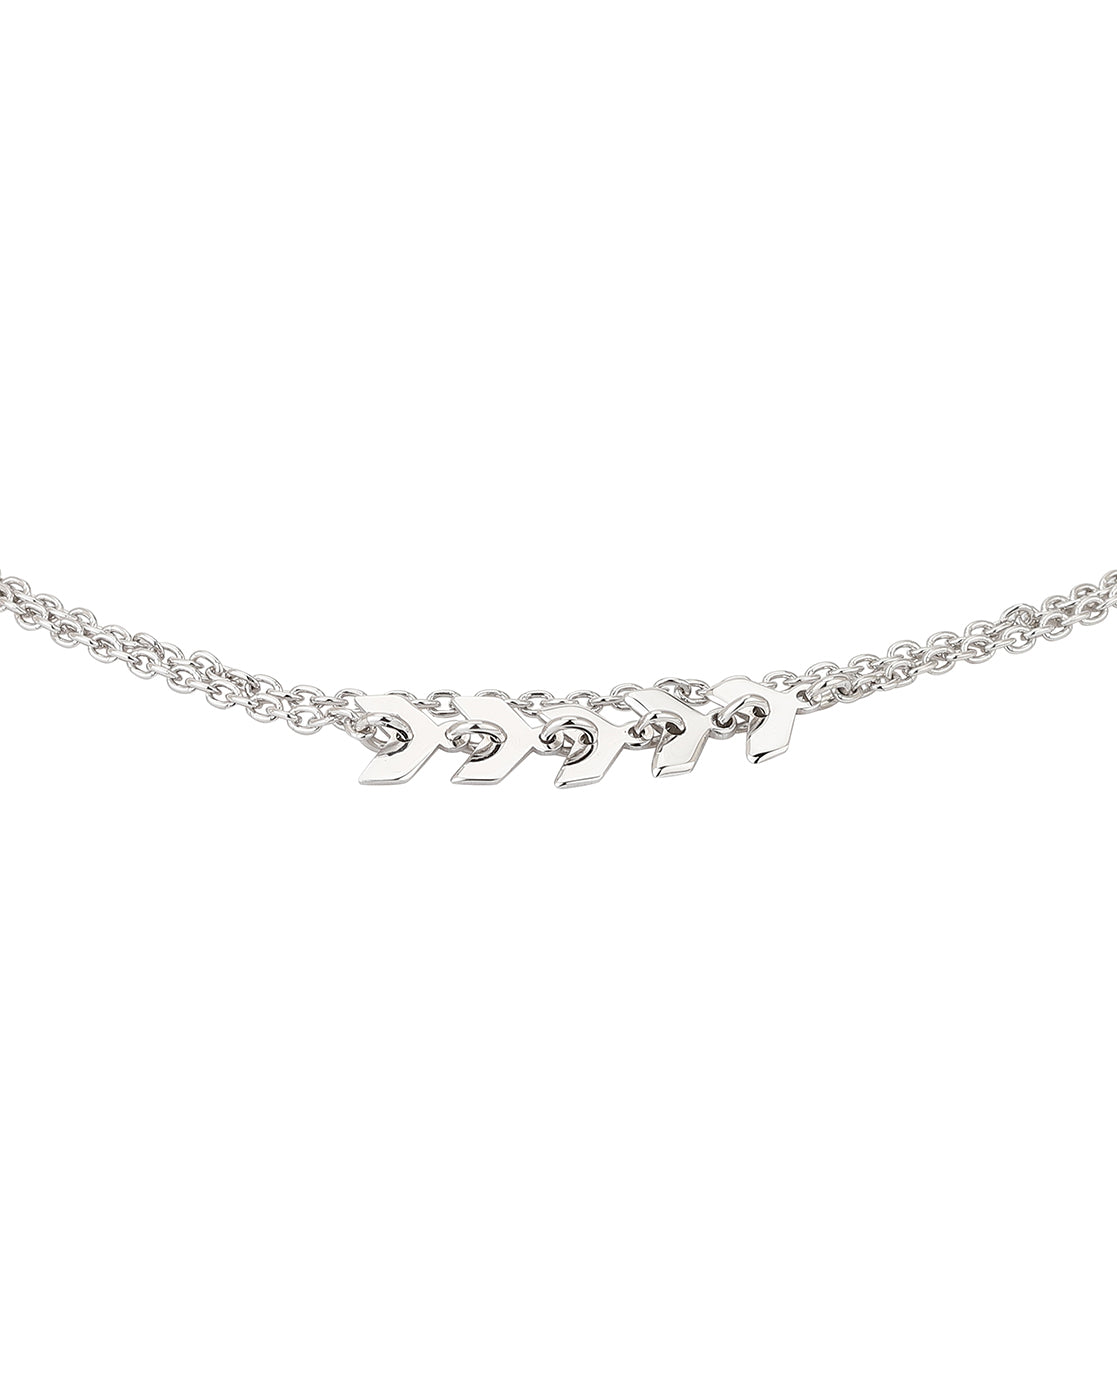 Carlton London 925 Sterling Silver Rhodium Plated Silver Toned Arow Shape Anklet For Women